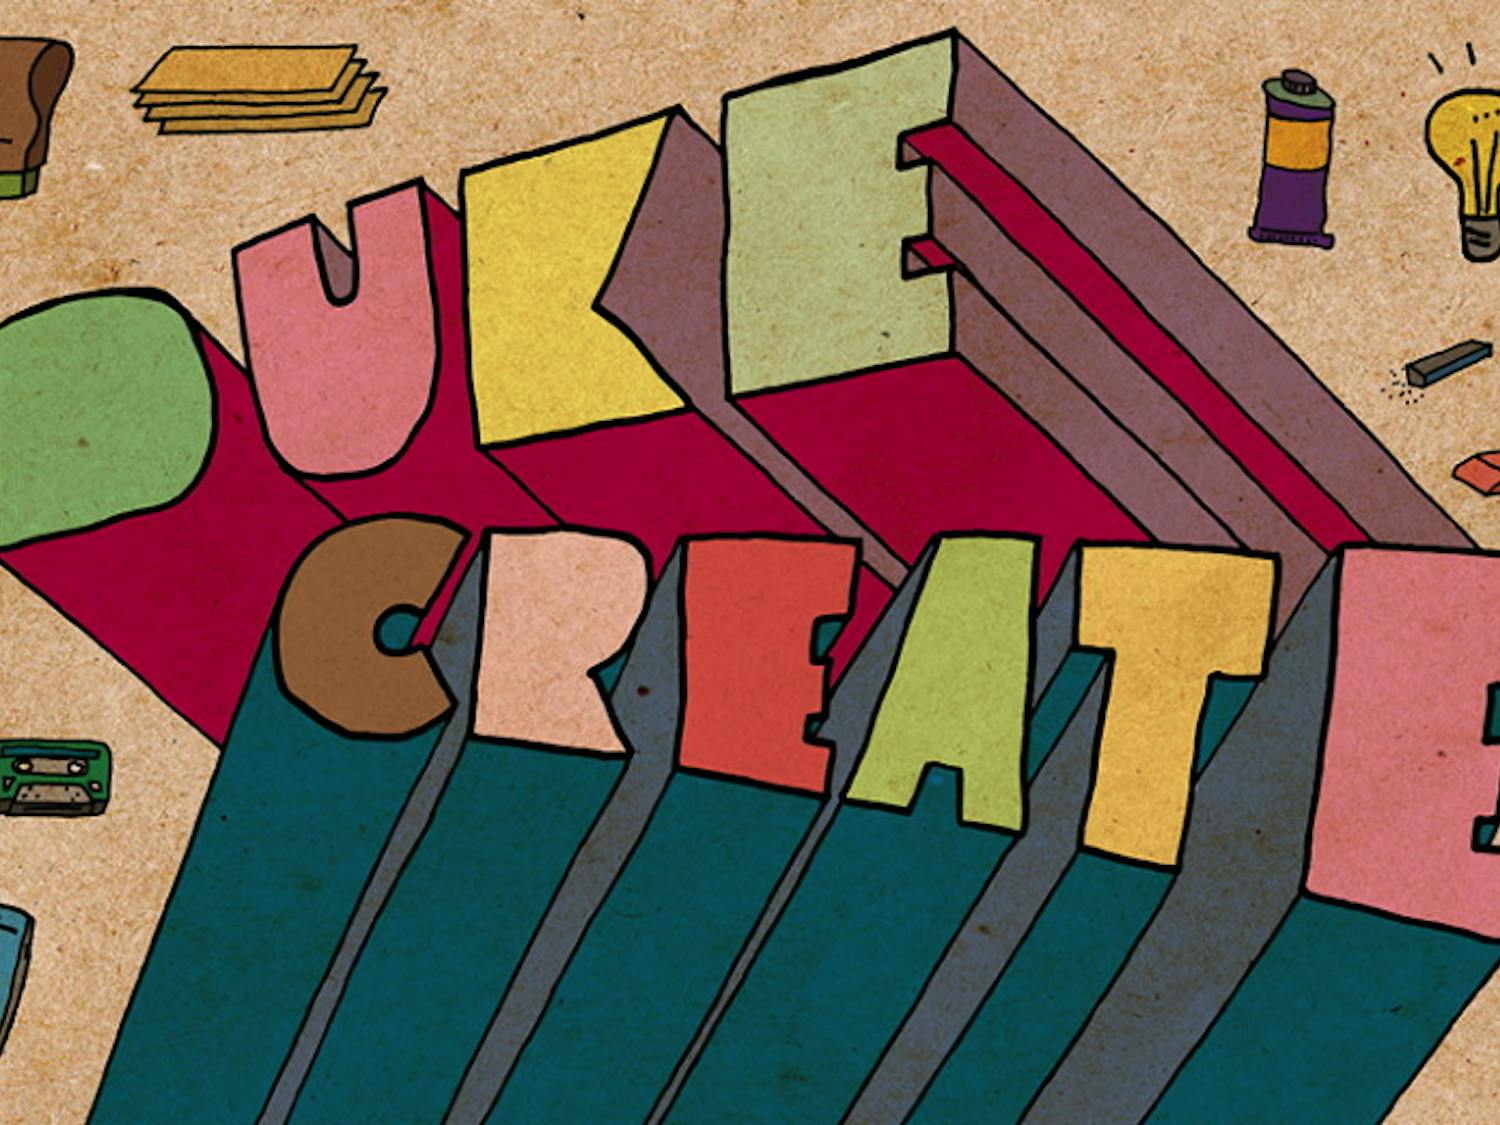 DukeCreate will continue holding collaborative workshops for students to hone their creative abilities, learn new skills and build community in an isolated time.